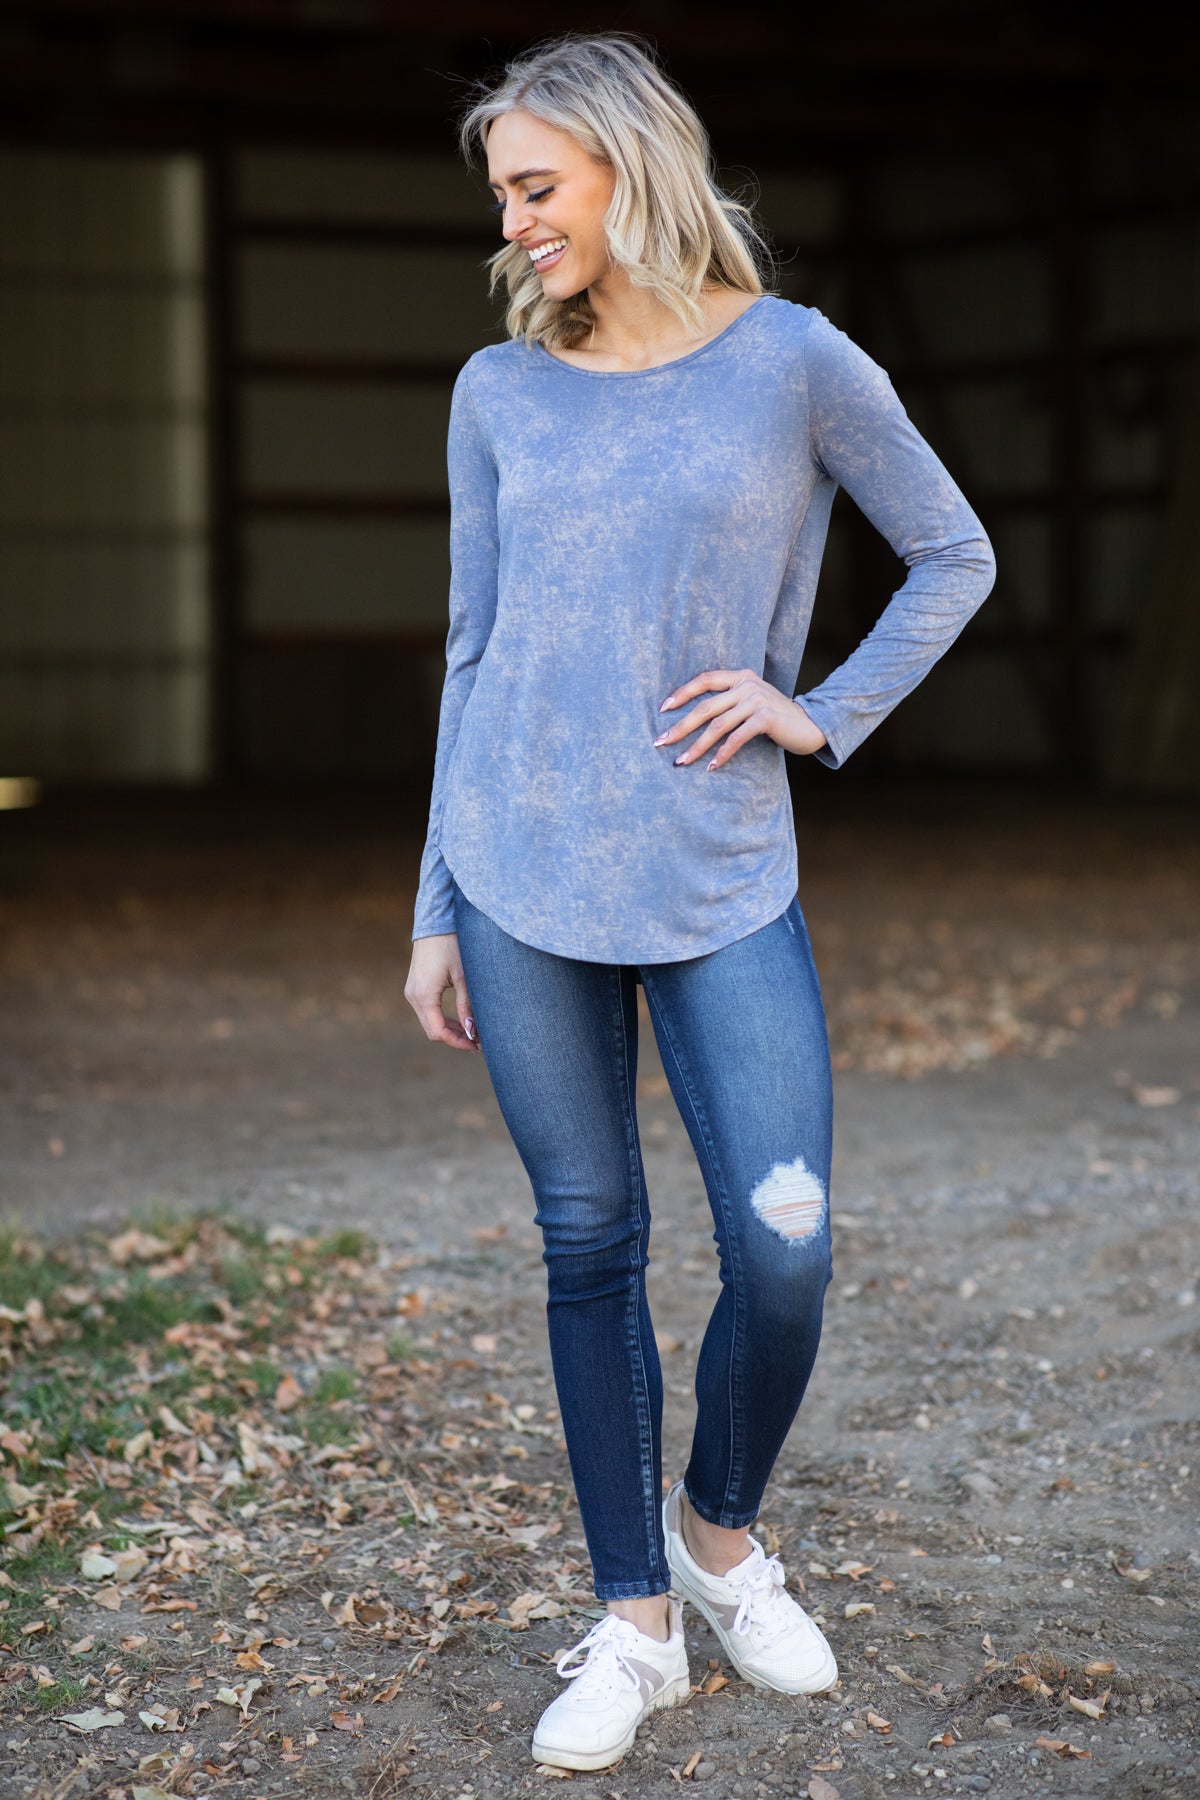 Dusty Blue Acid Wash Long Sleeve Top - Filly Flair